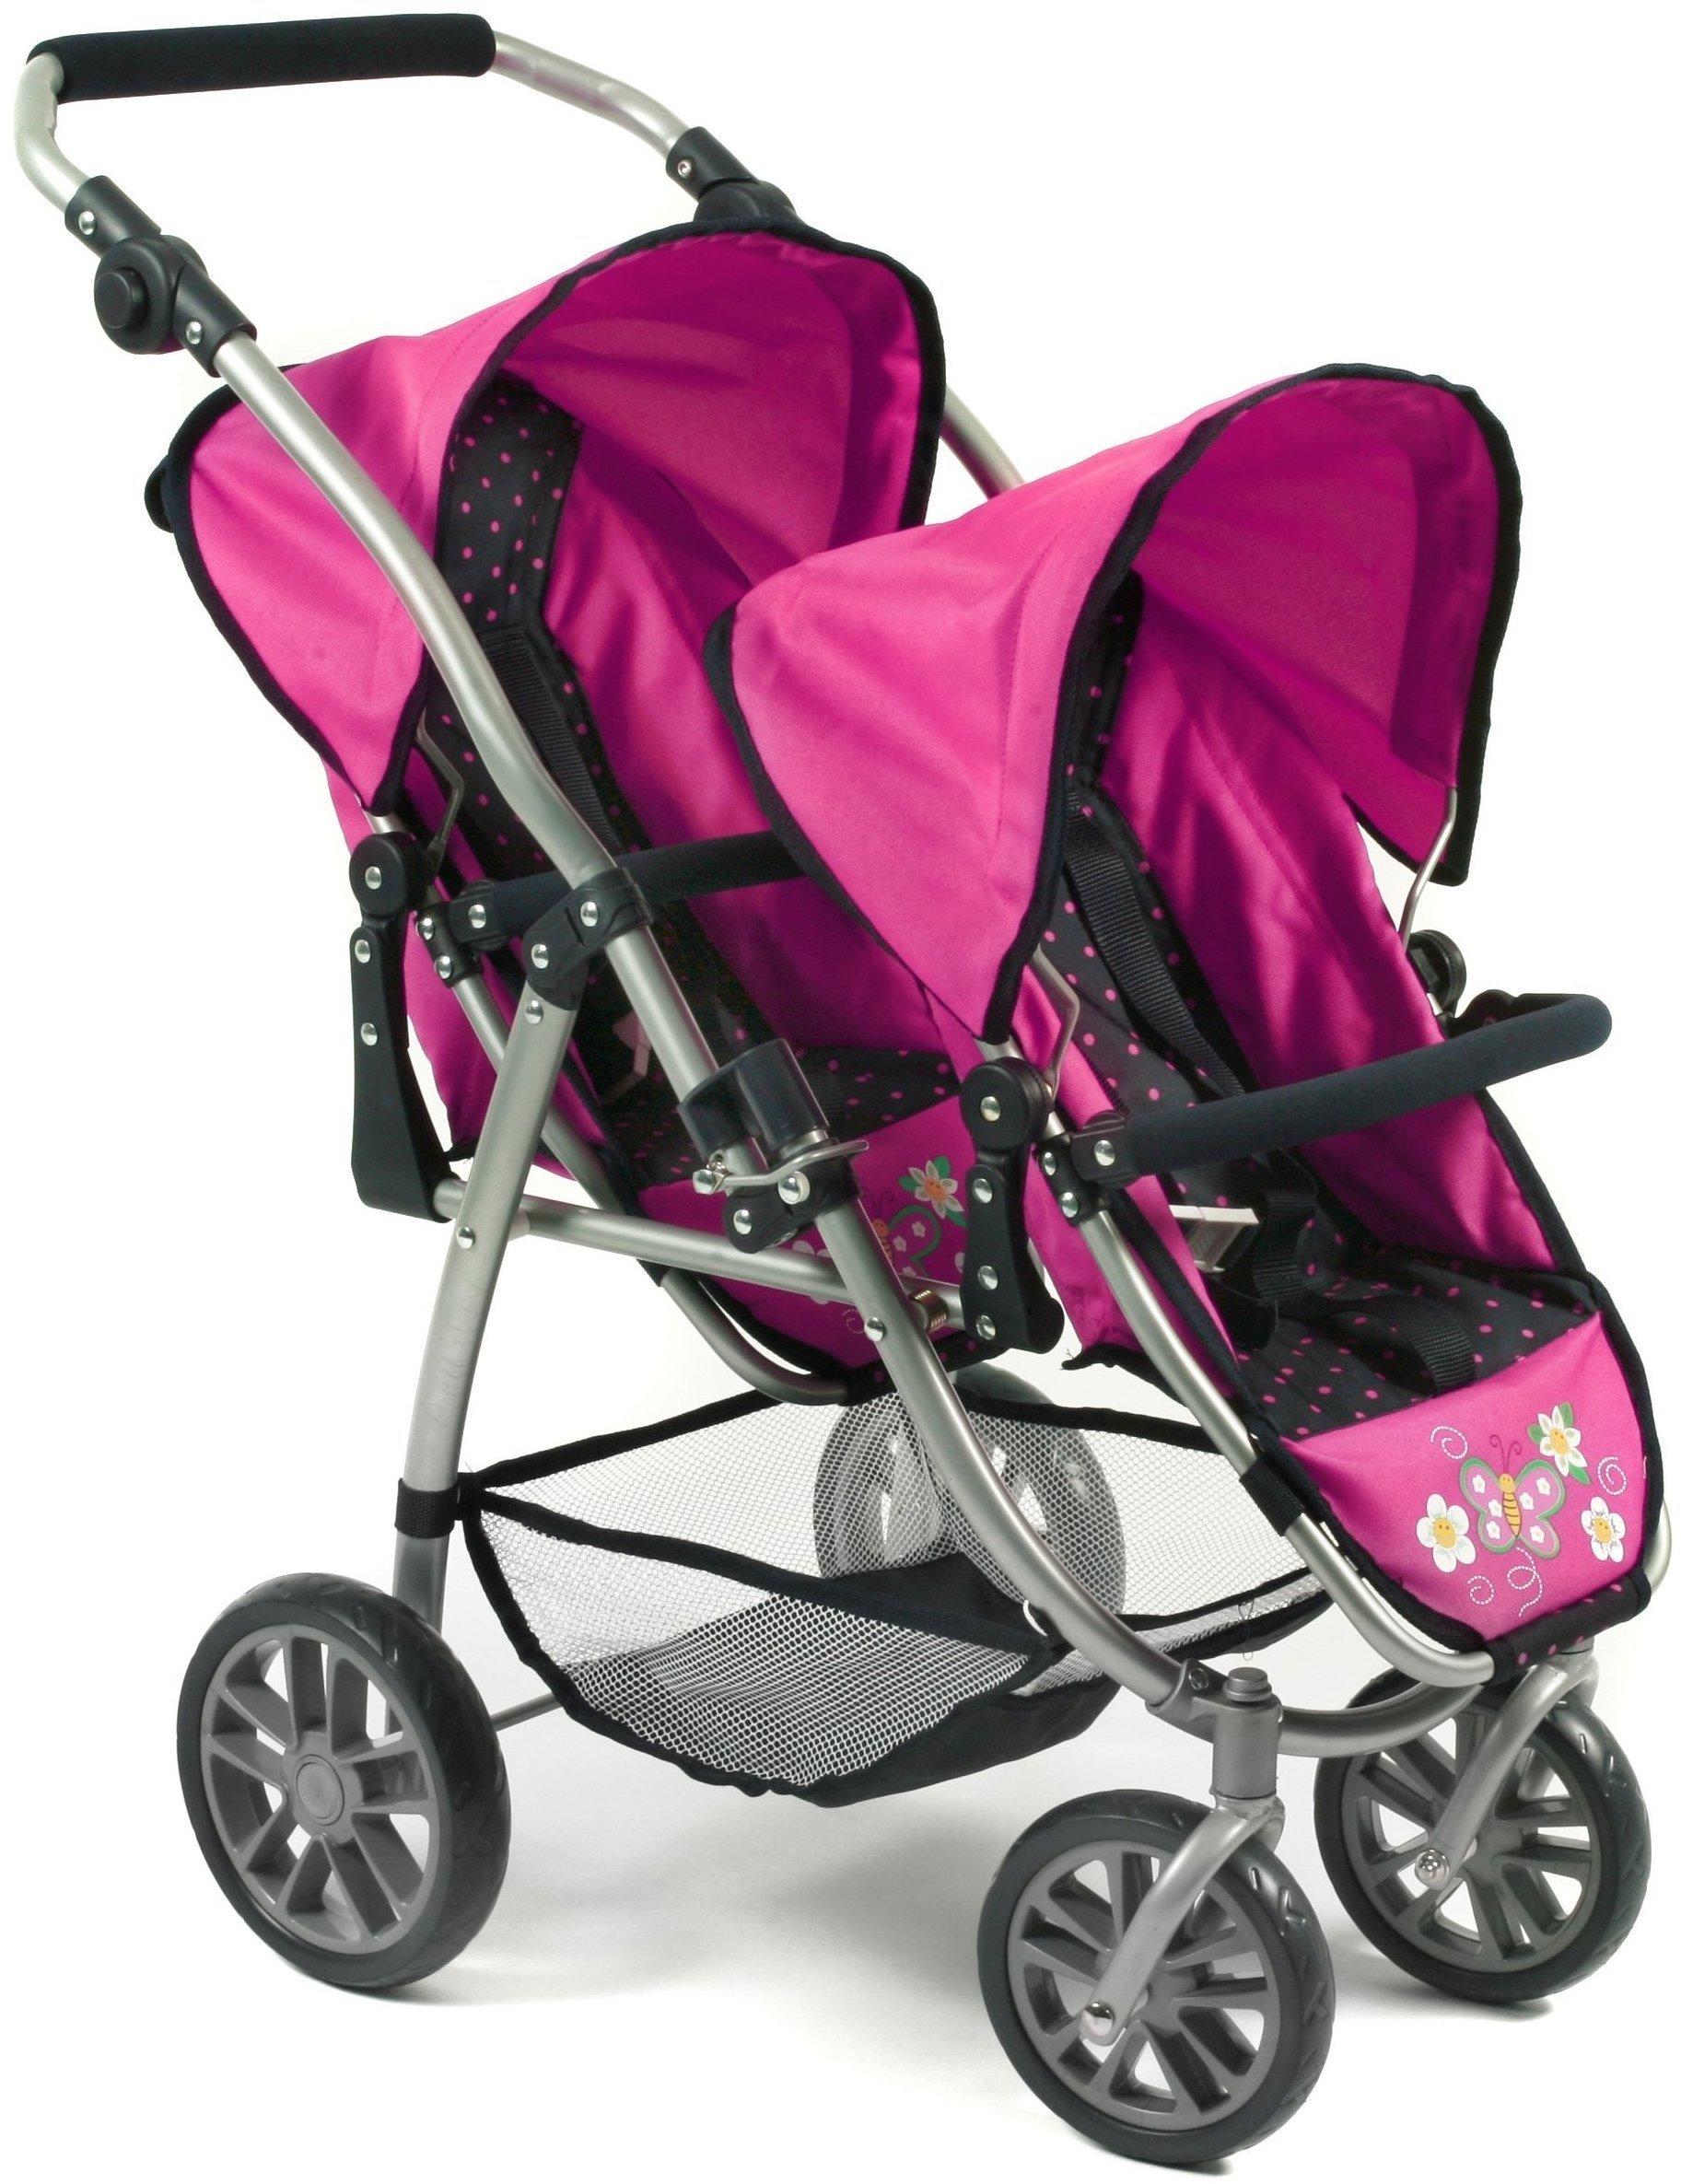 Bayer Chic 2000 Zwillingspuppenwagen Tandem-Buggy Vario Dots Pink 